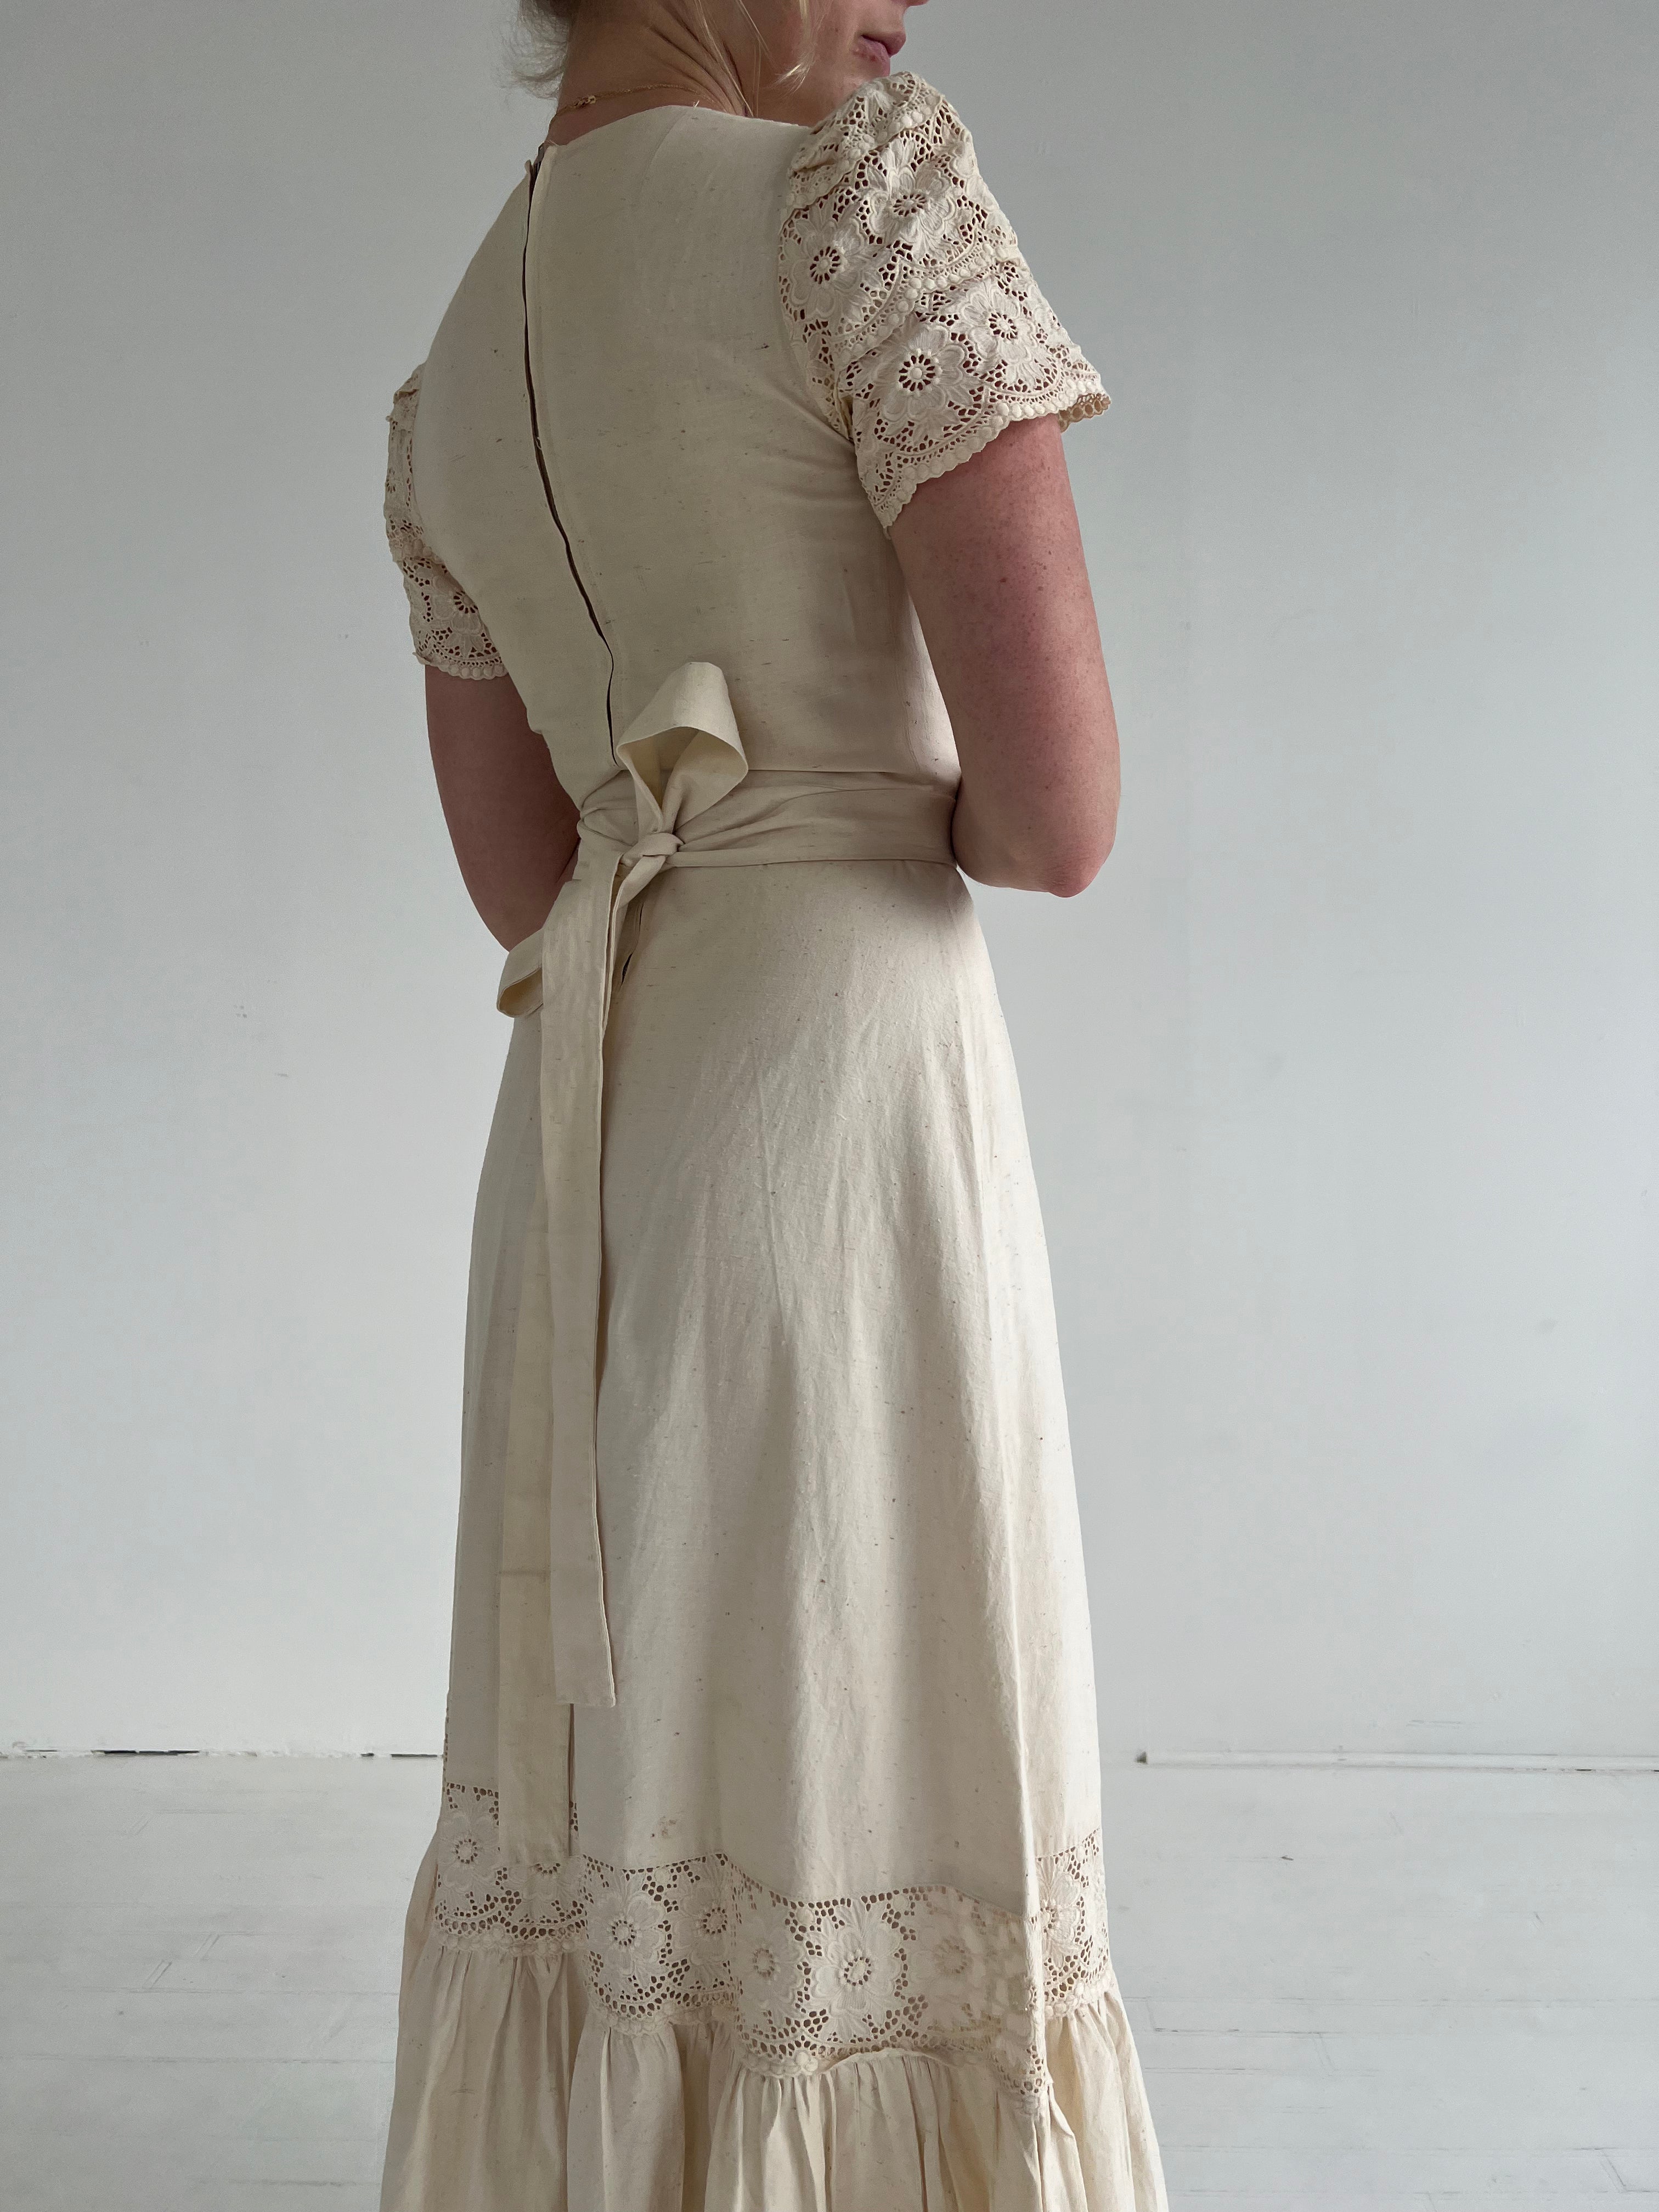 1970's Cotton Dress with Eyelet